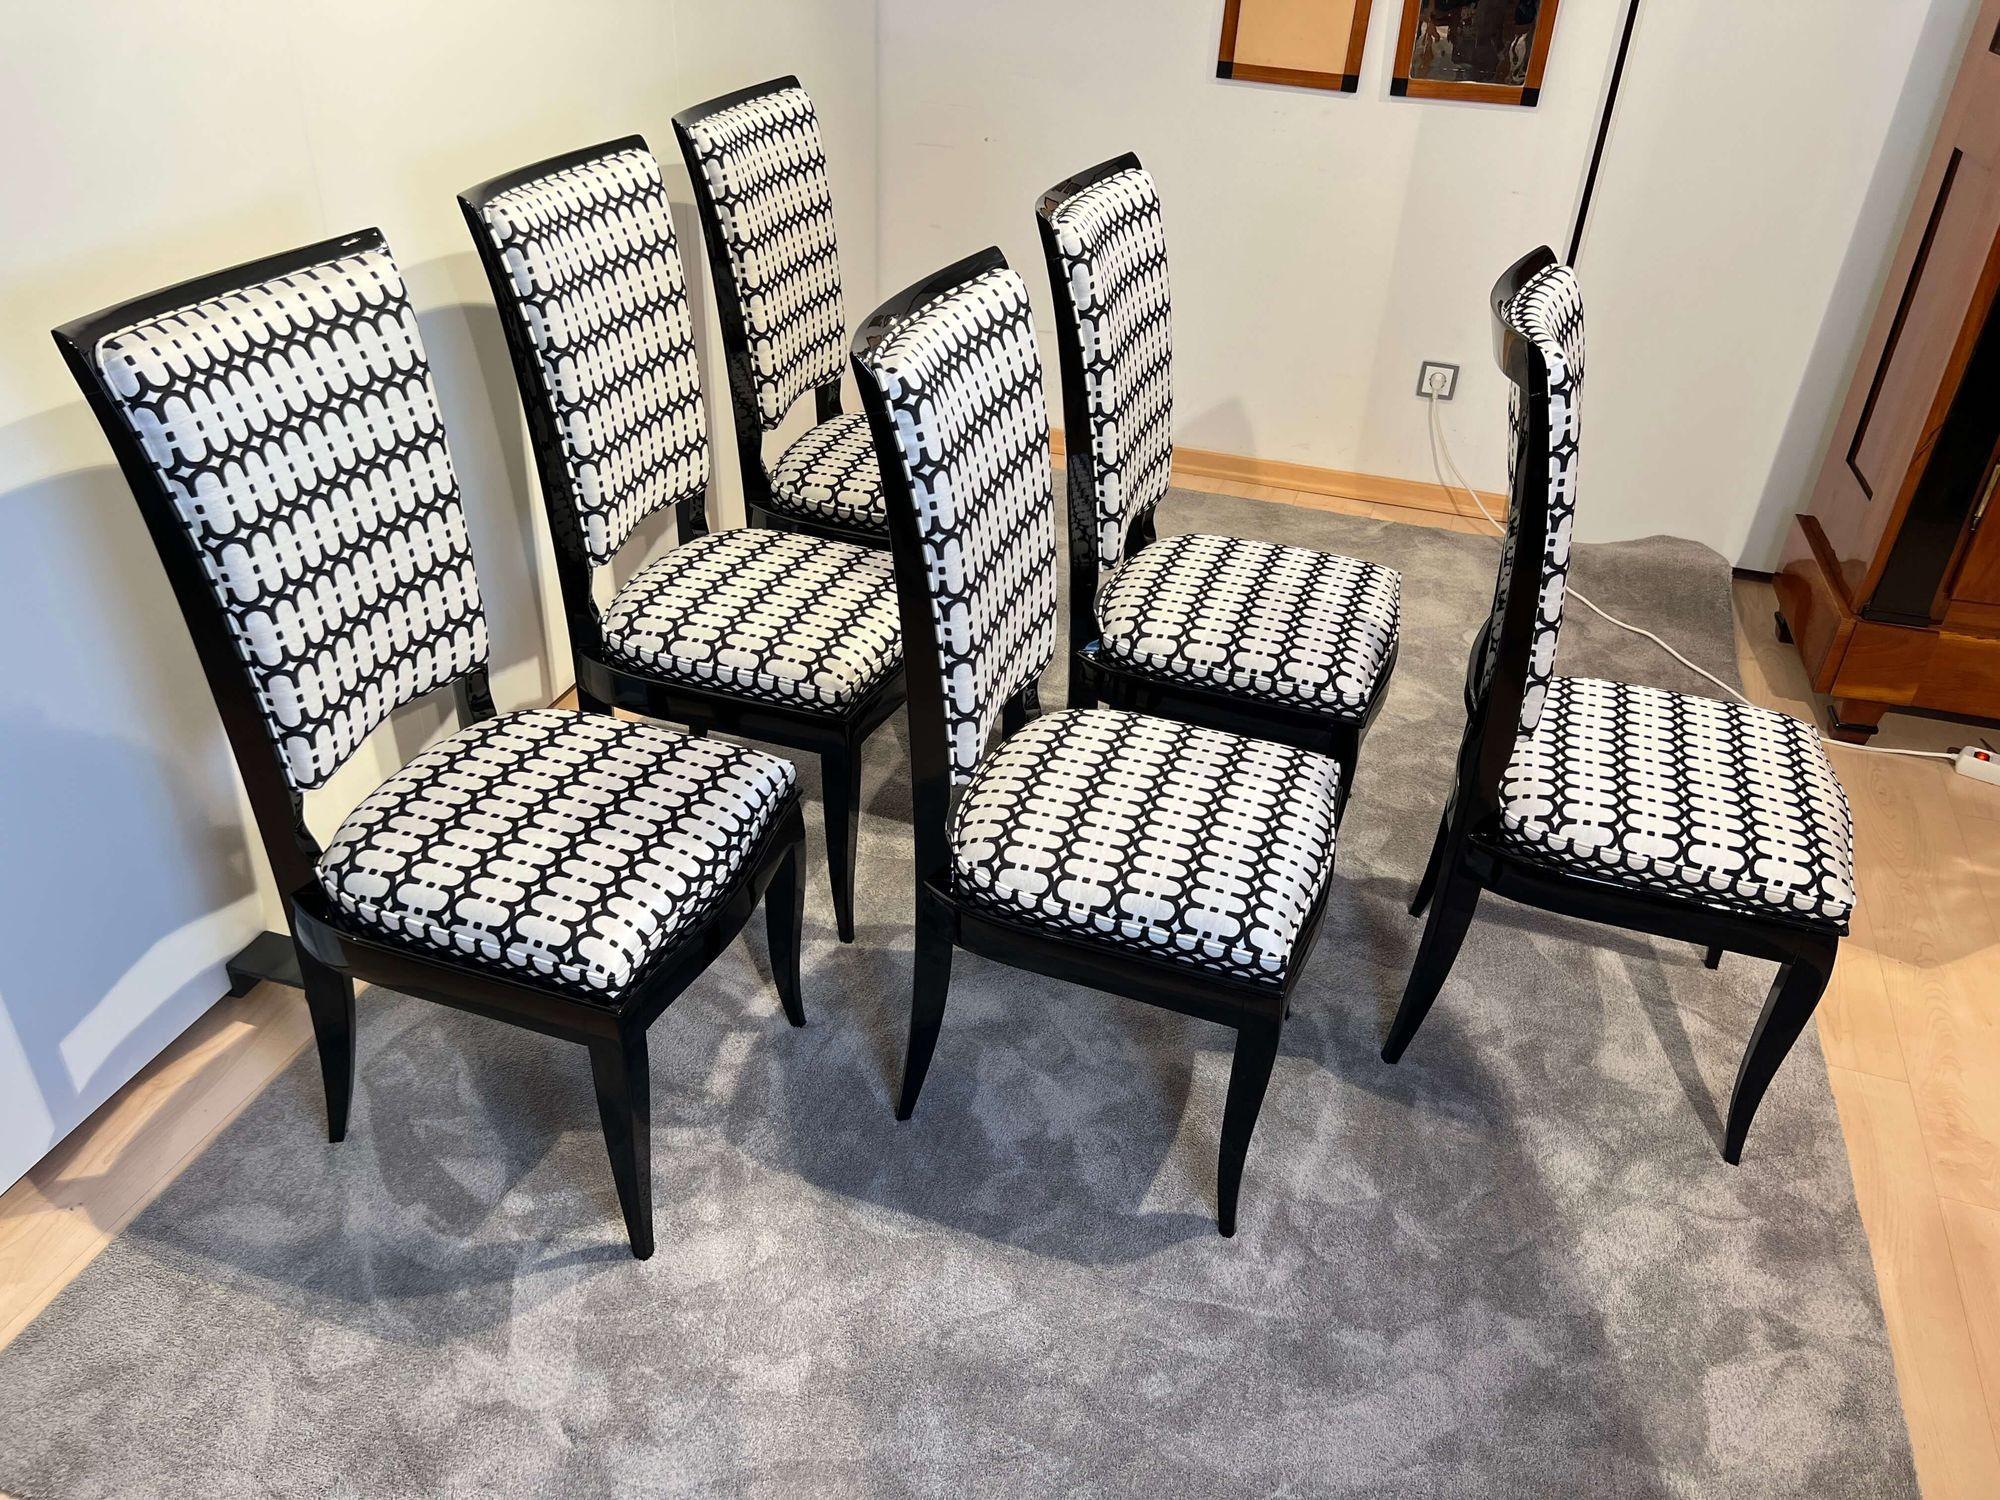 Blackened Set of Six Art Deco High Back Dining Chairs, Black Lacquer, France, circa 1930 For Sale